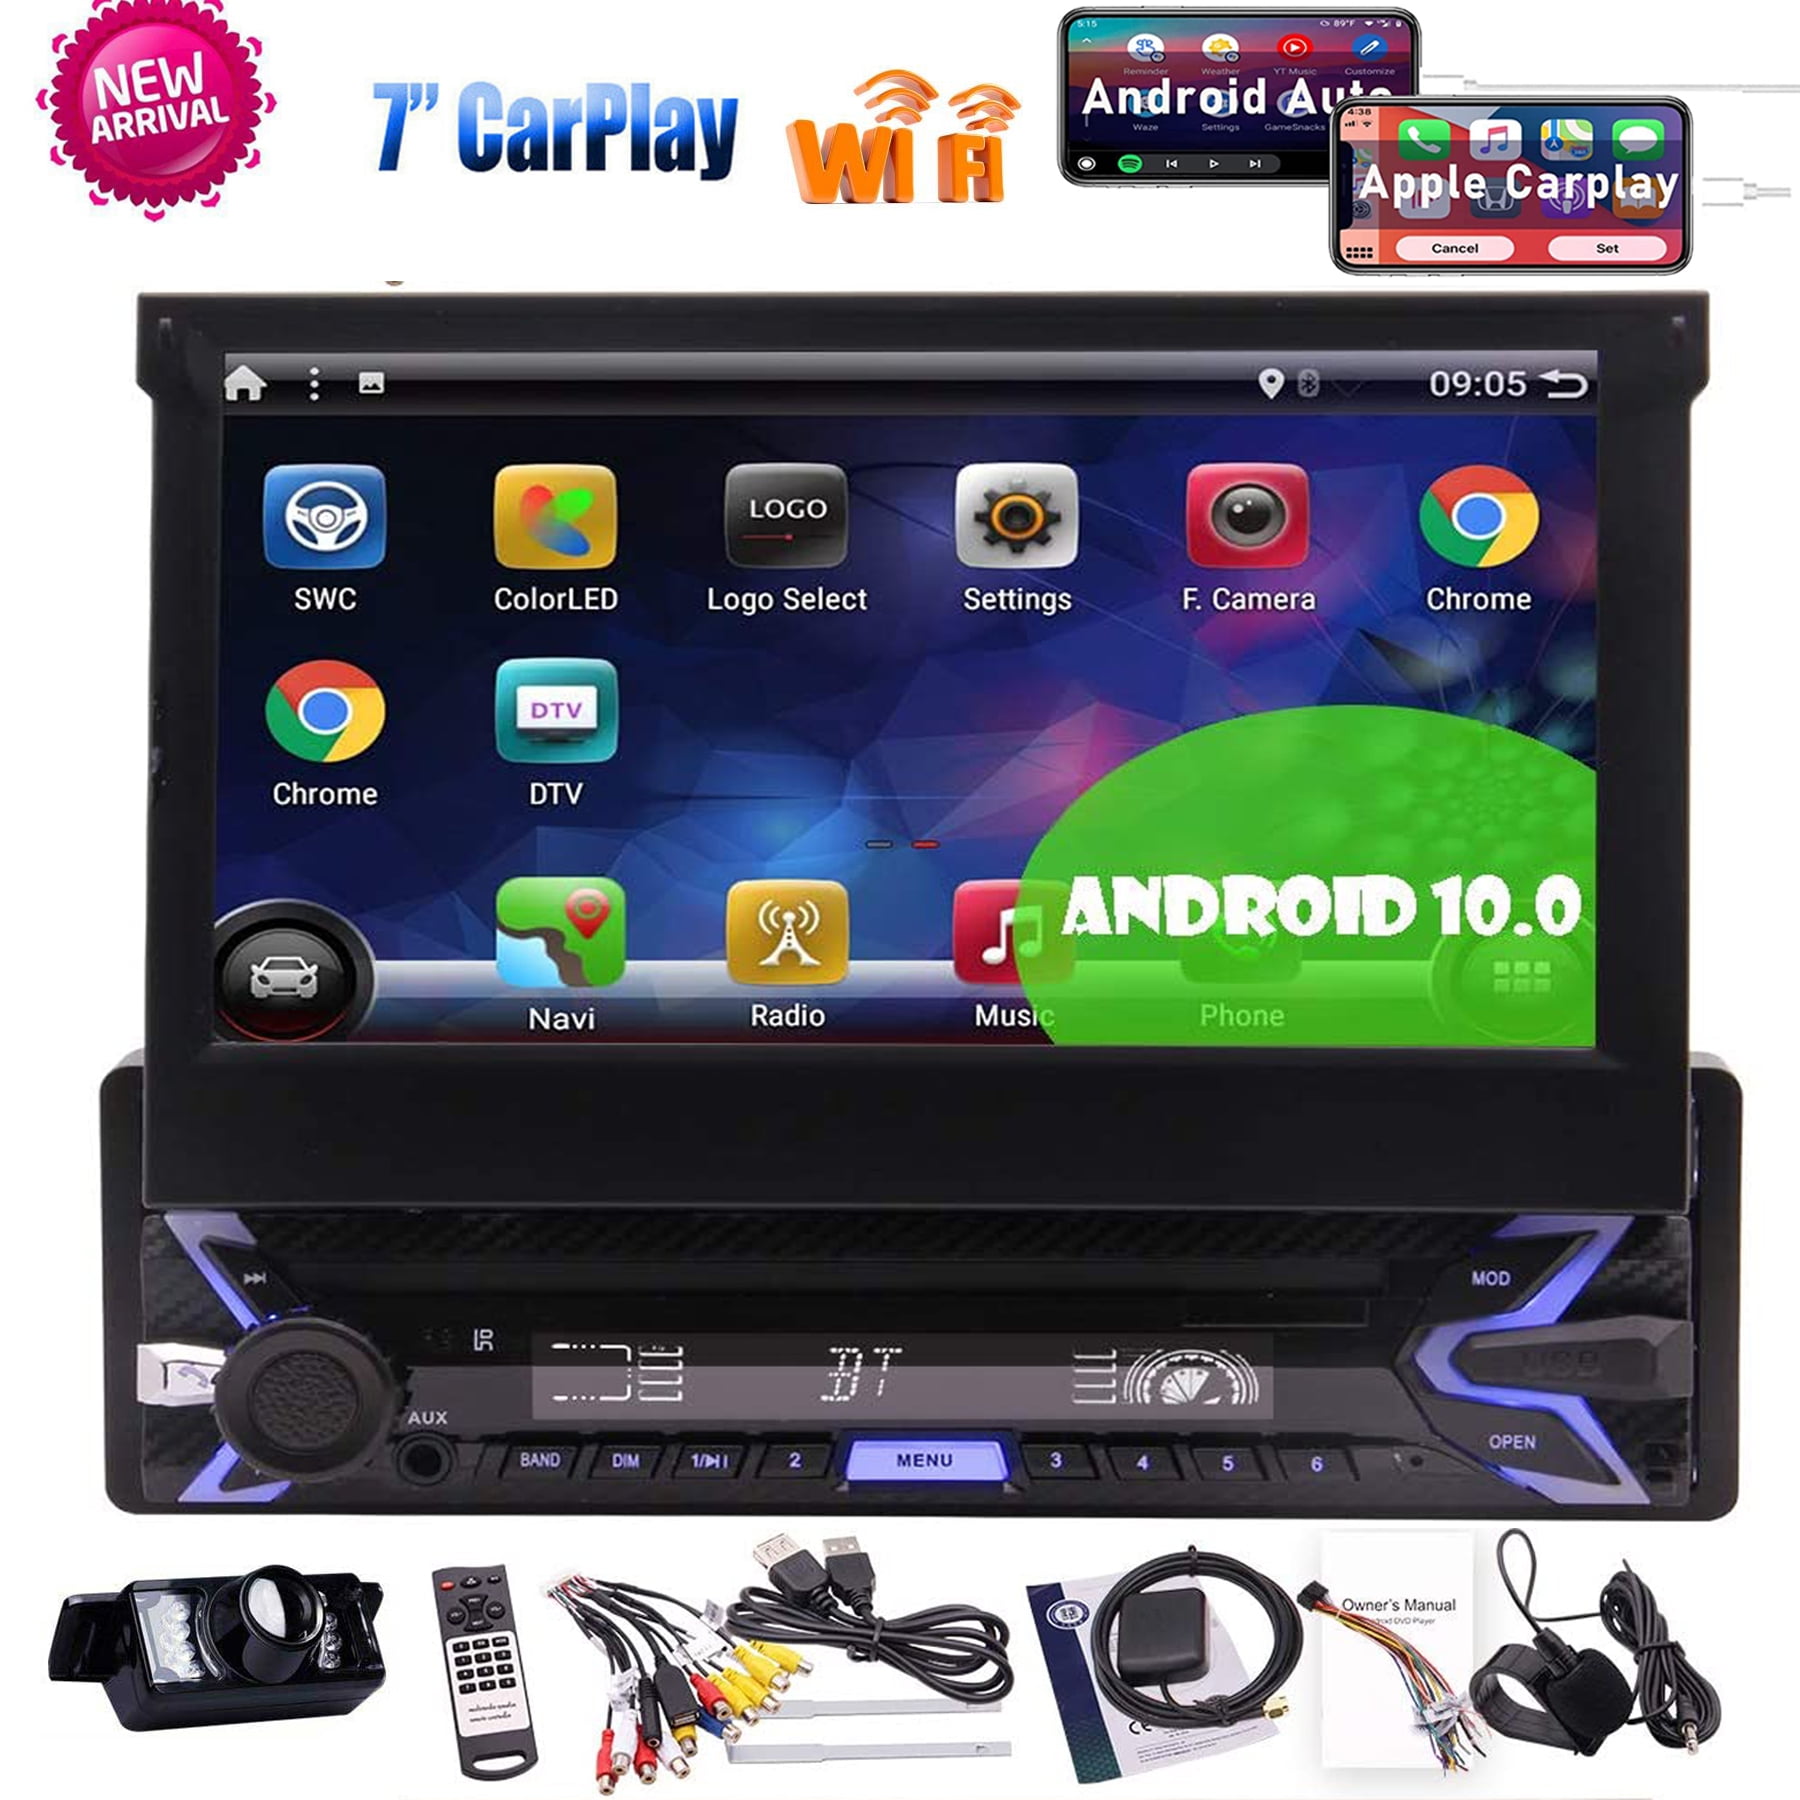 7" 1 Din Android HD GPS Flip Car Stereo Radio Video MP5 Player Touch Screen USB 